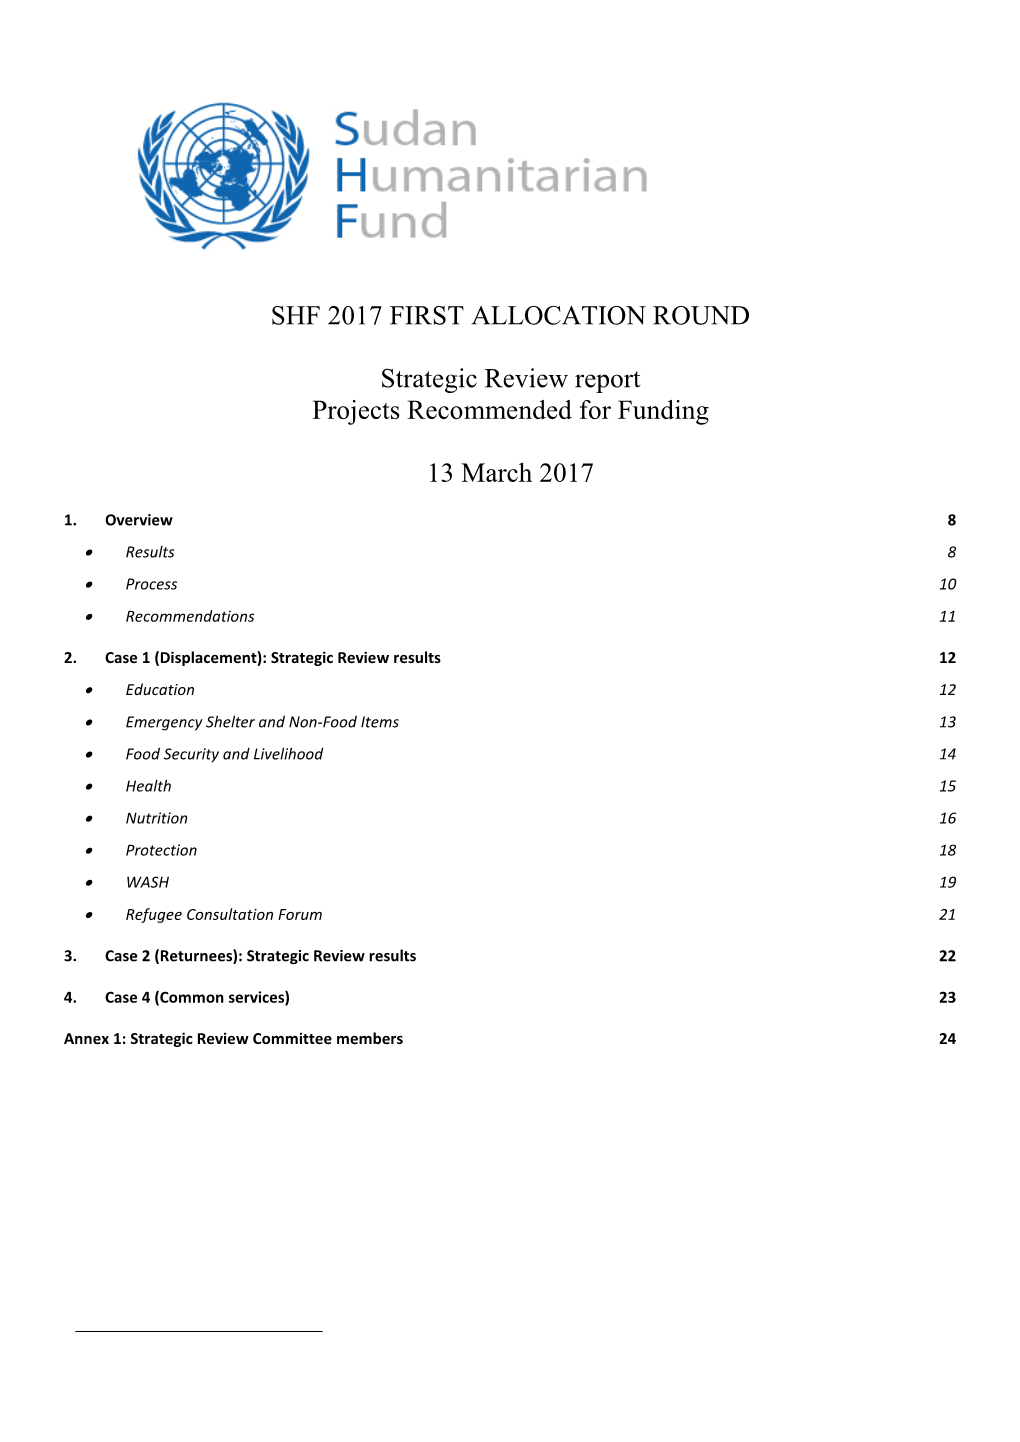 SHF 2017 FIRST ALLOCATION ROUND Strategic Review Report